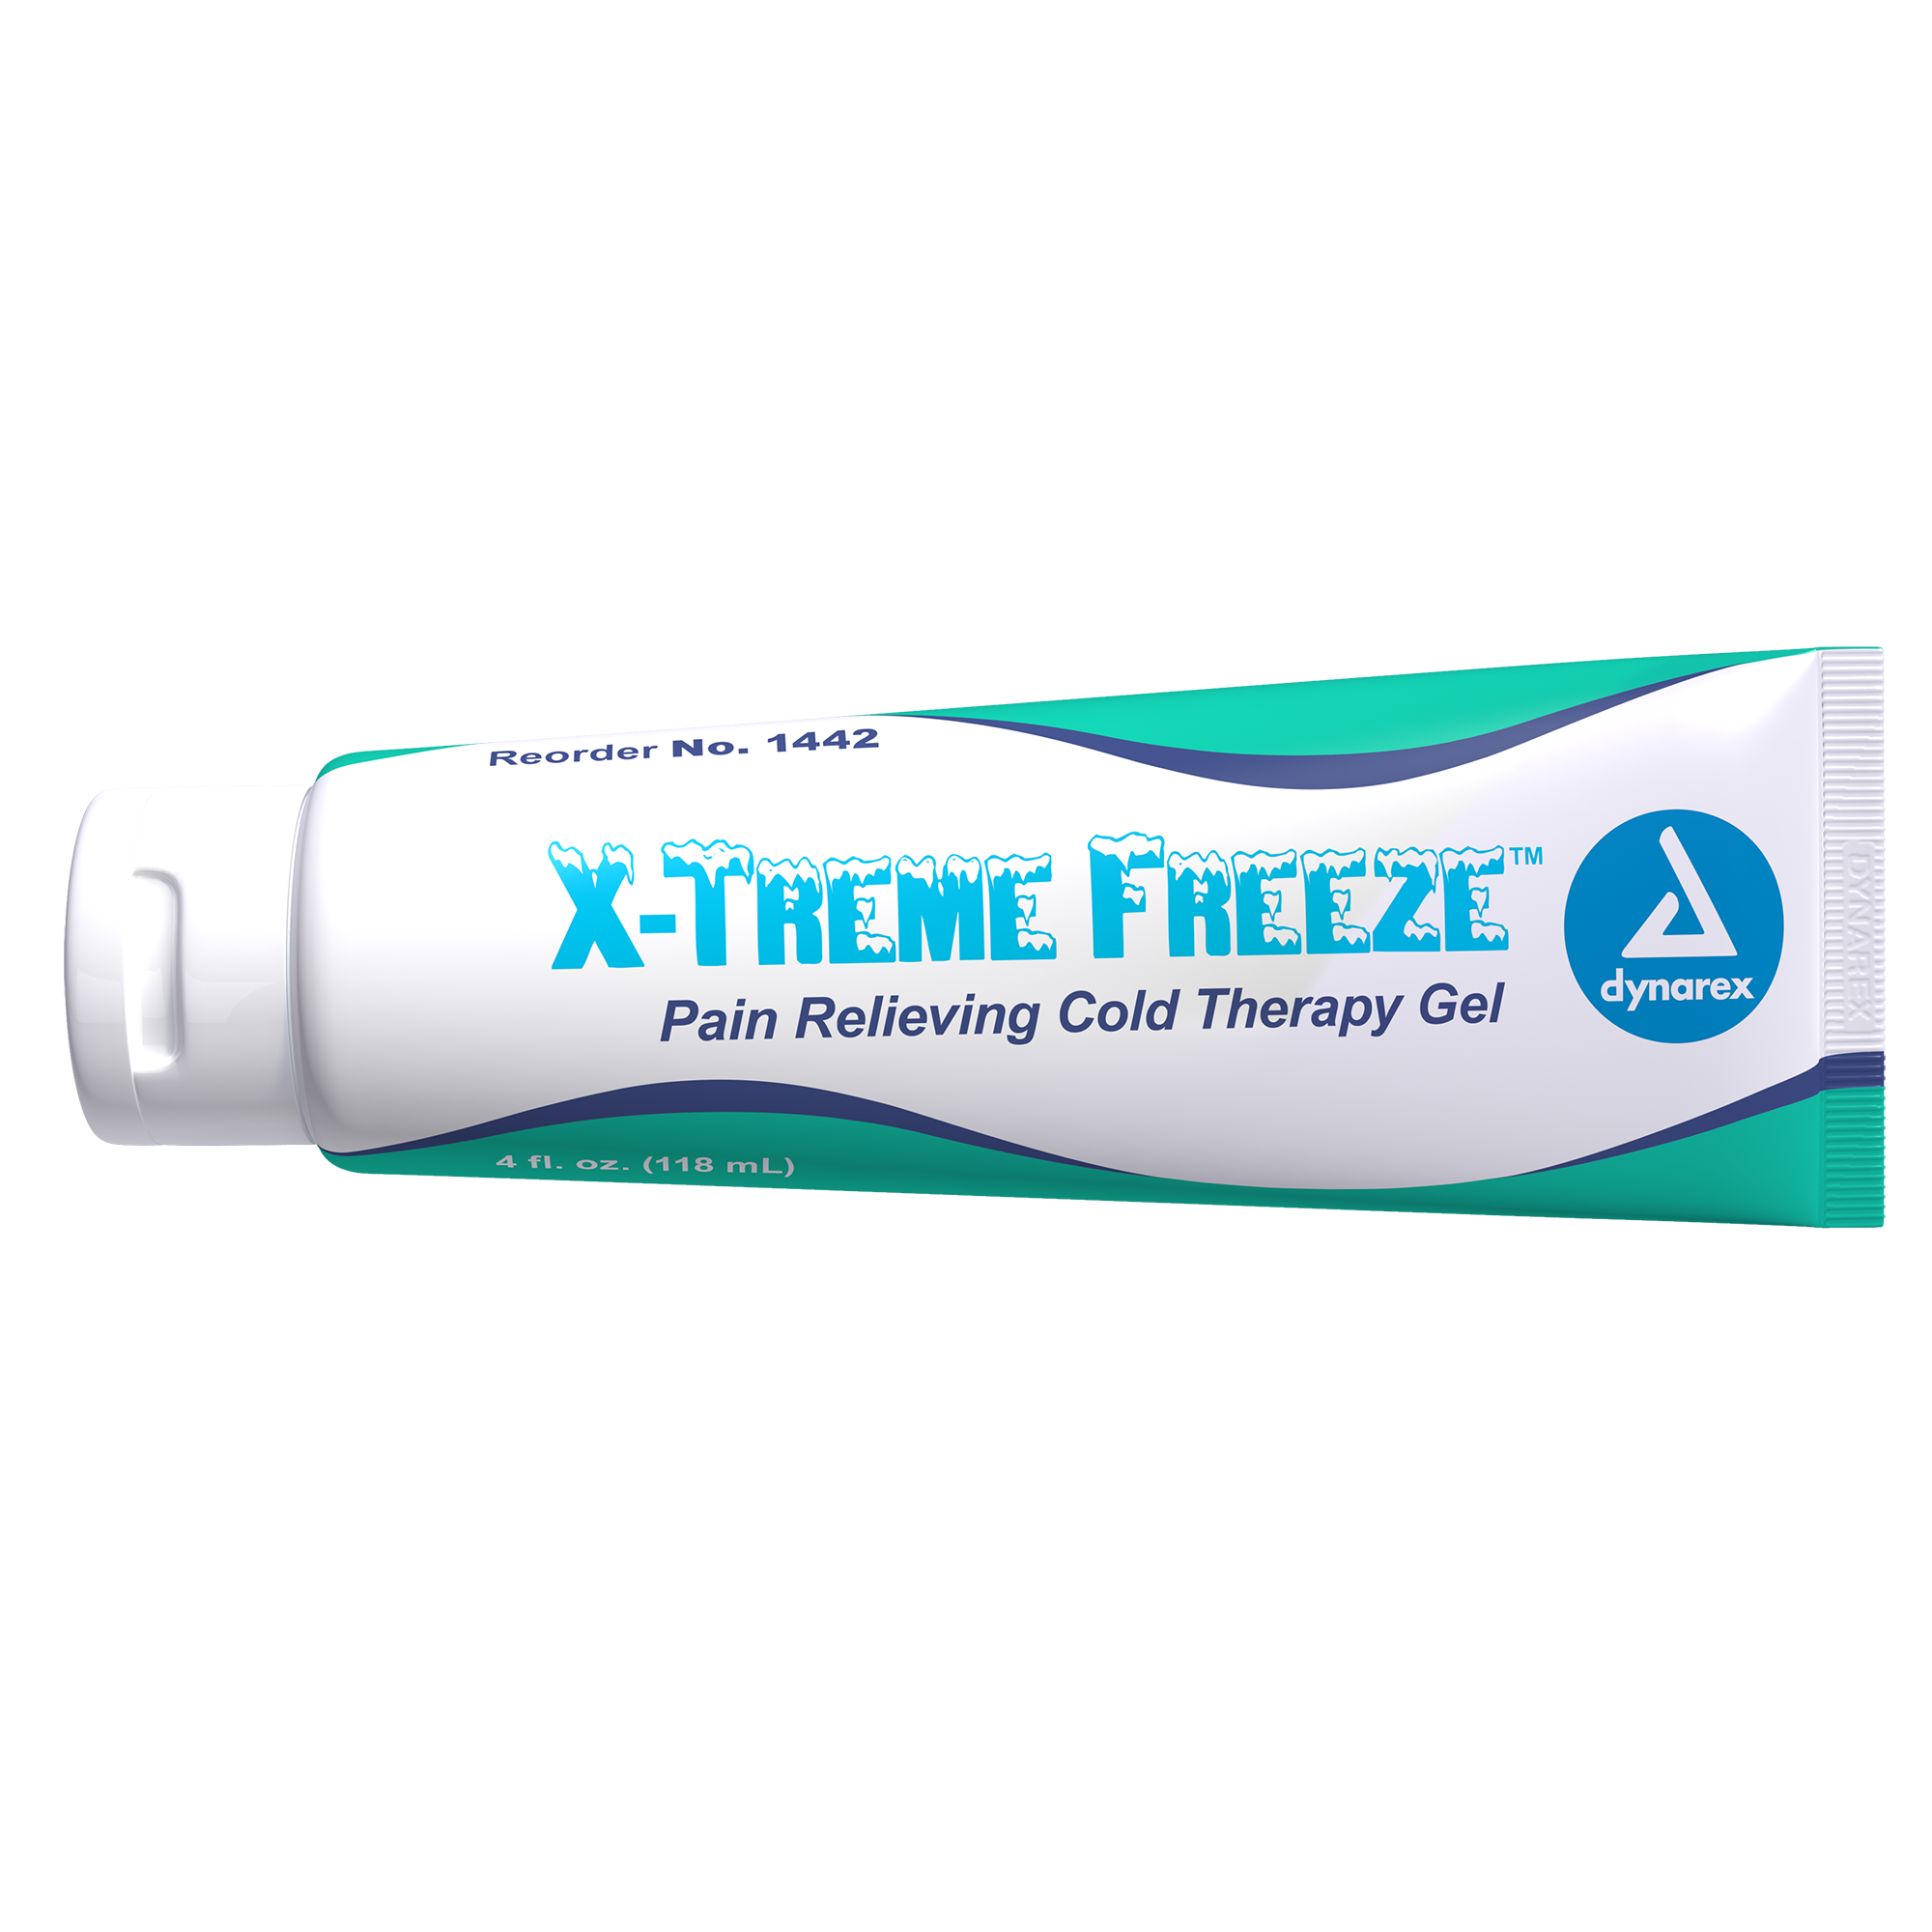 1442 Dynarex X-Treme Freeze Pain Relieving Cold Therapy Gel - 4 oz tube